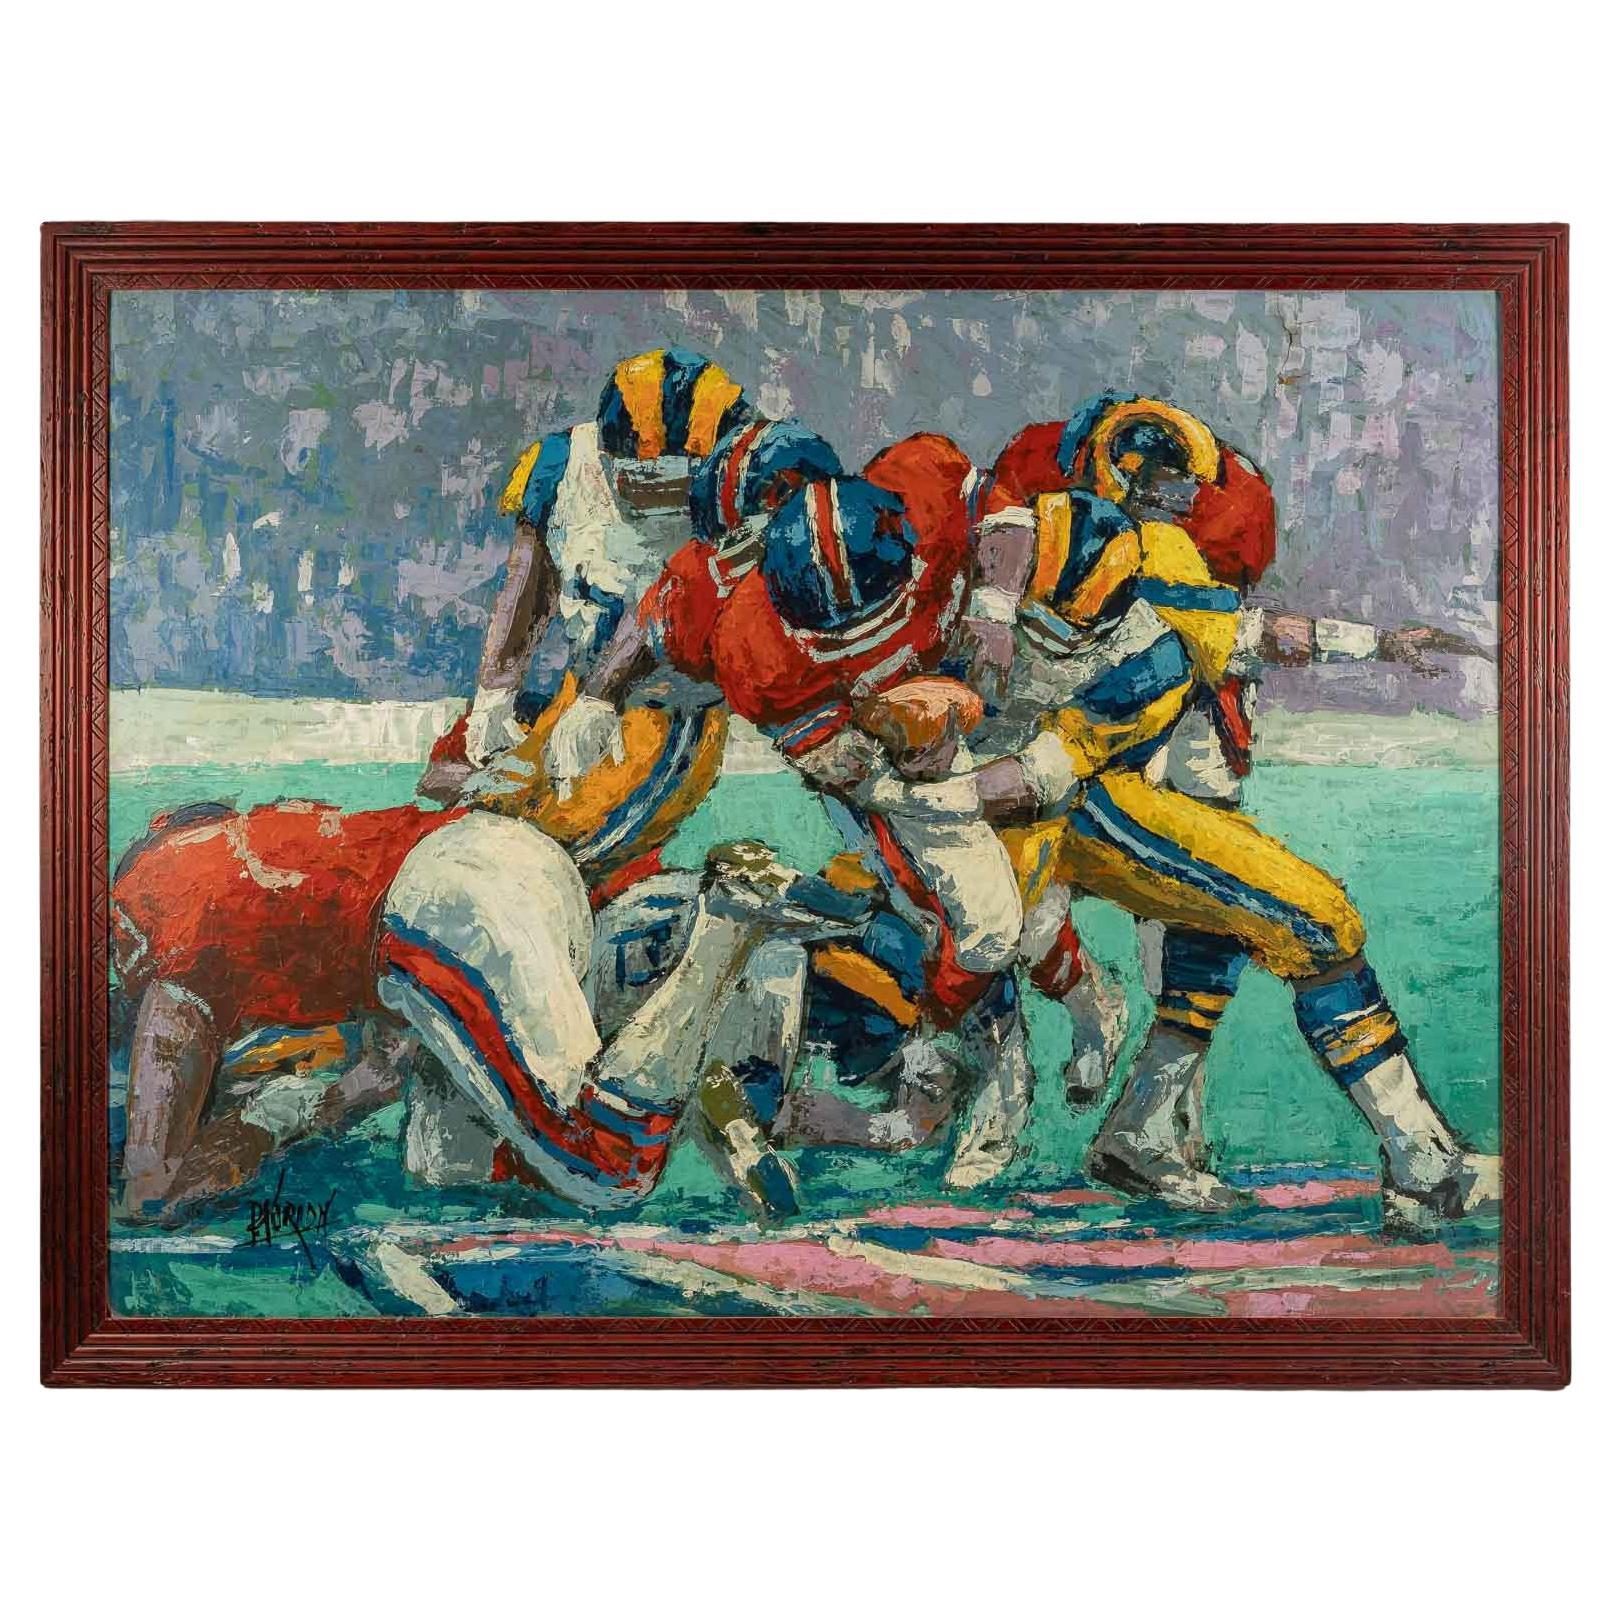 Important American Football Painting